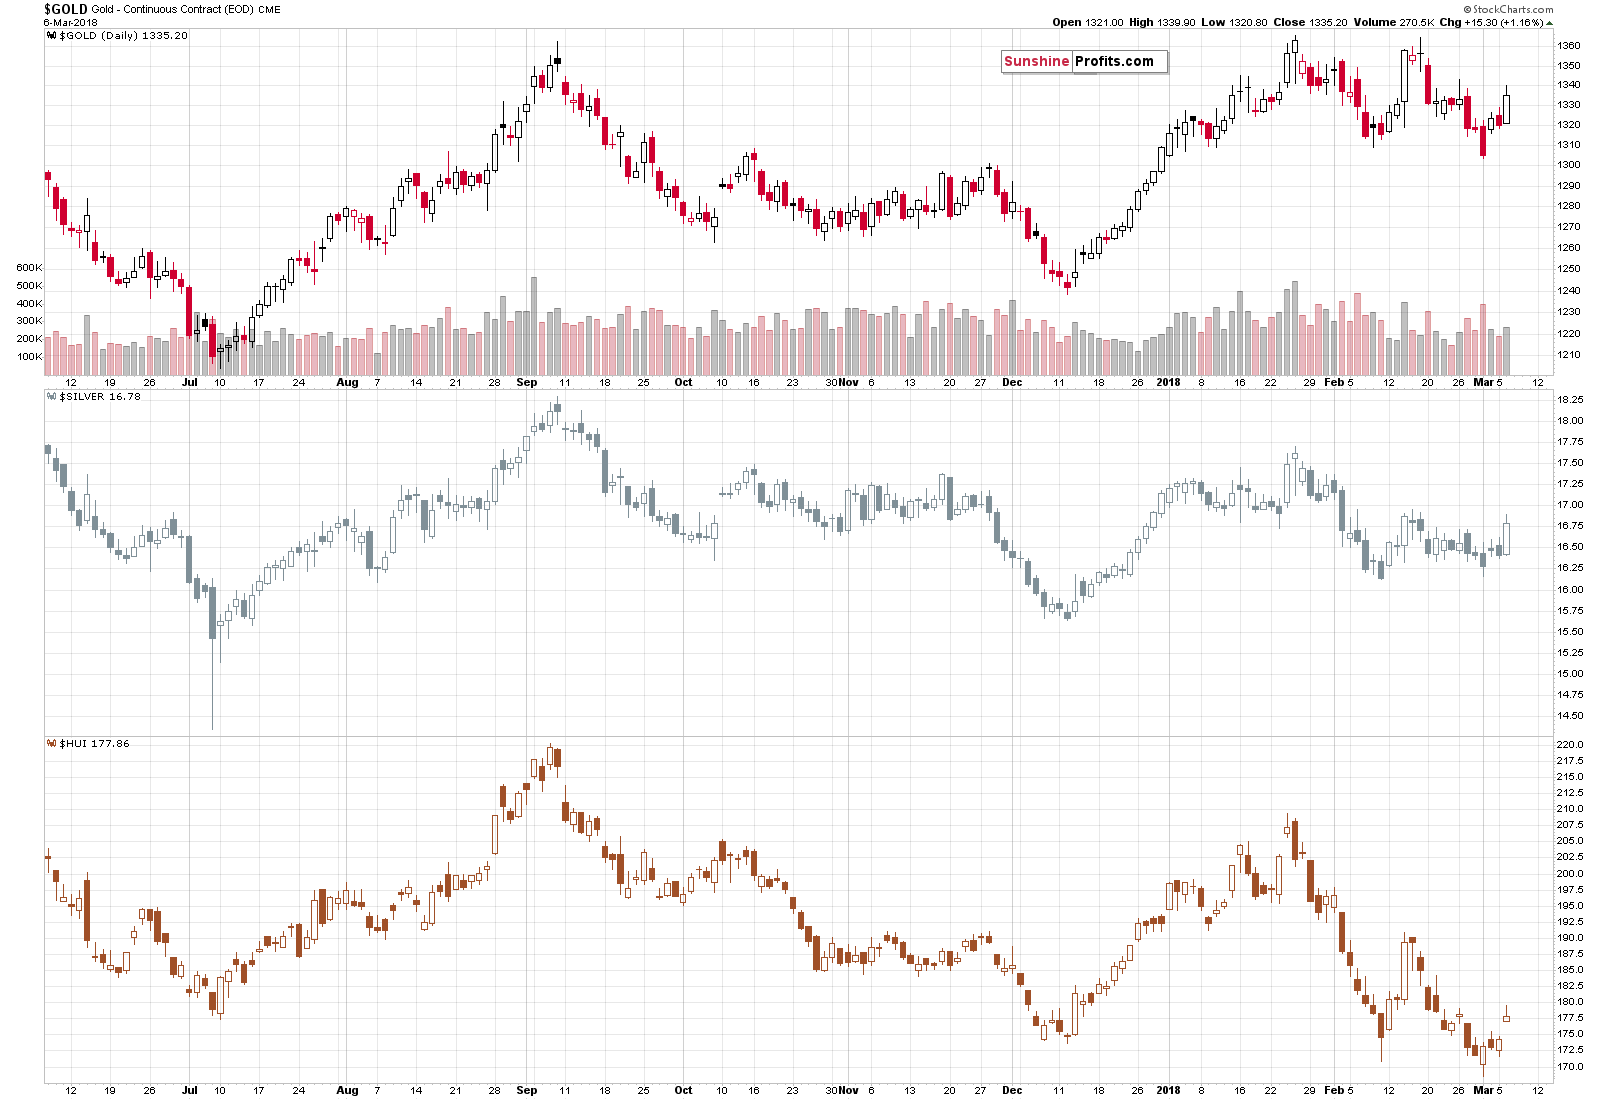 GLD, SLV, GDX - Gold, Silver and miners